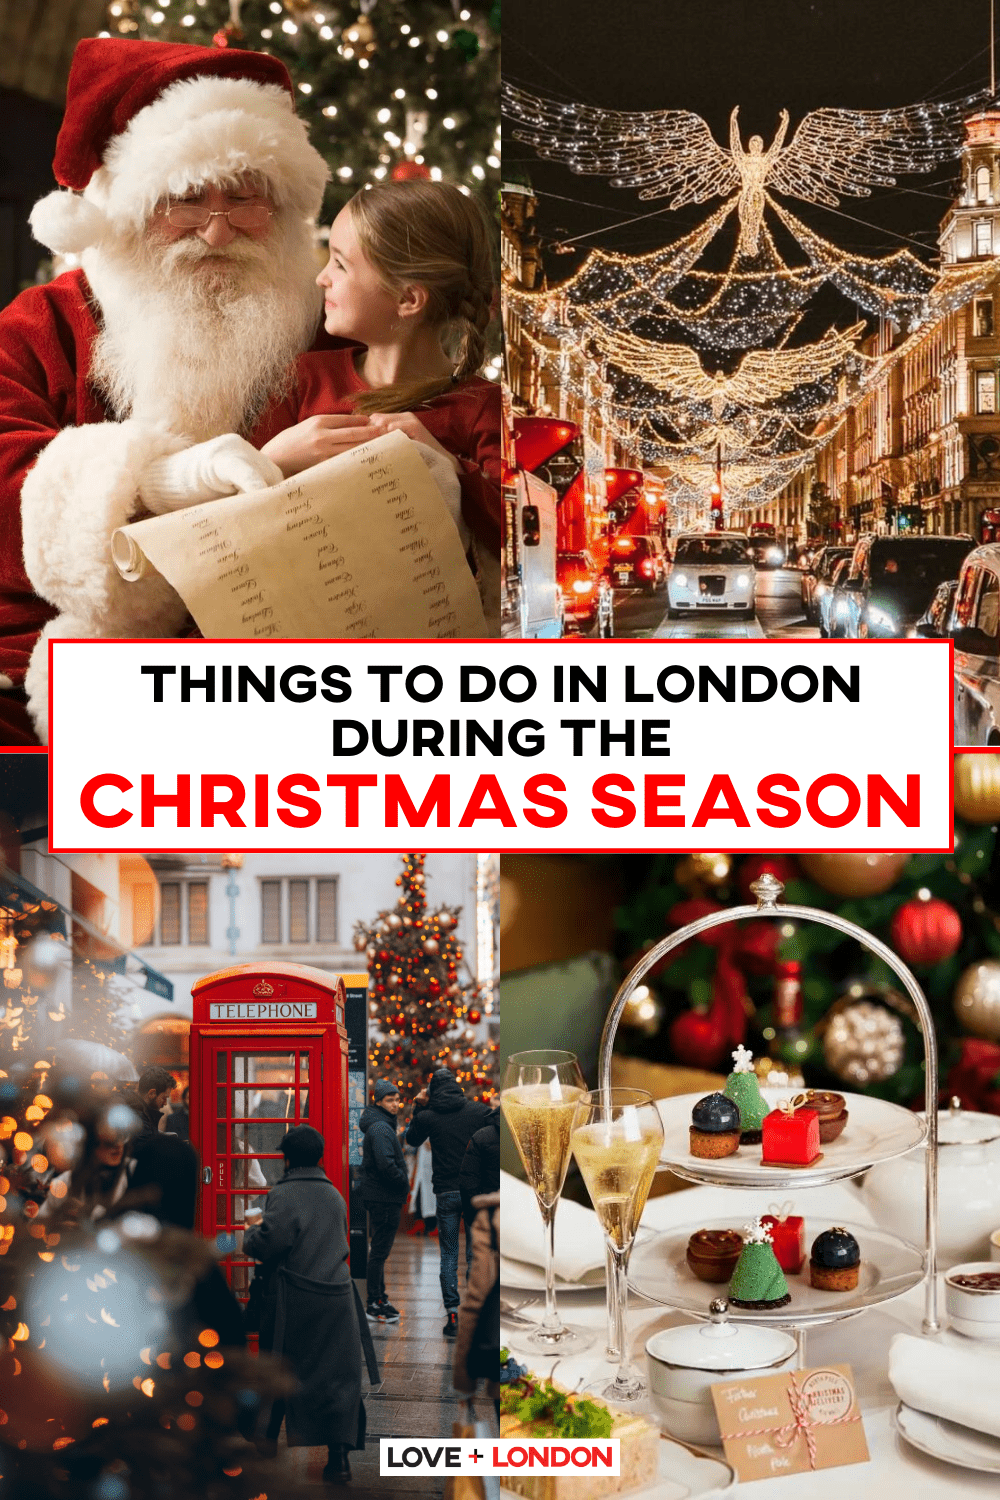 Things to Do in London During the Christmas Season